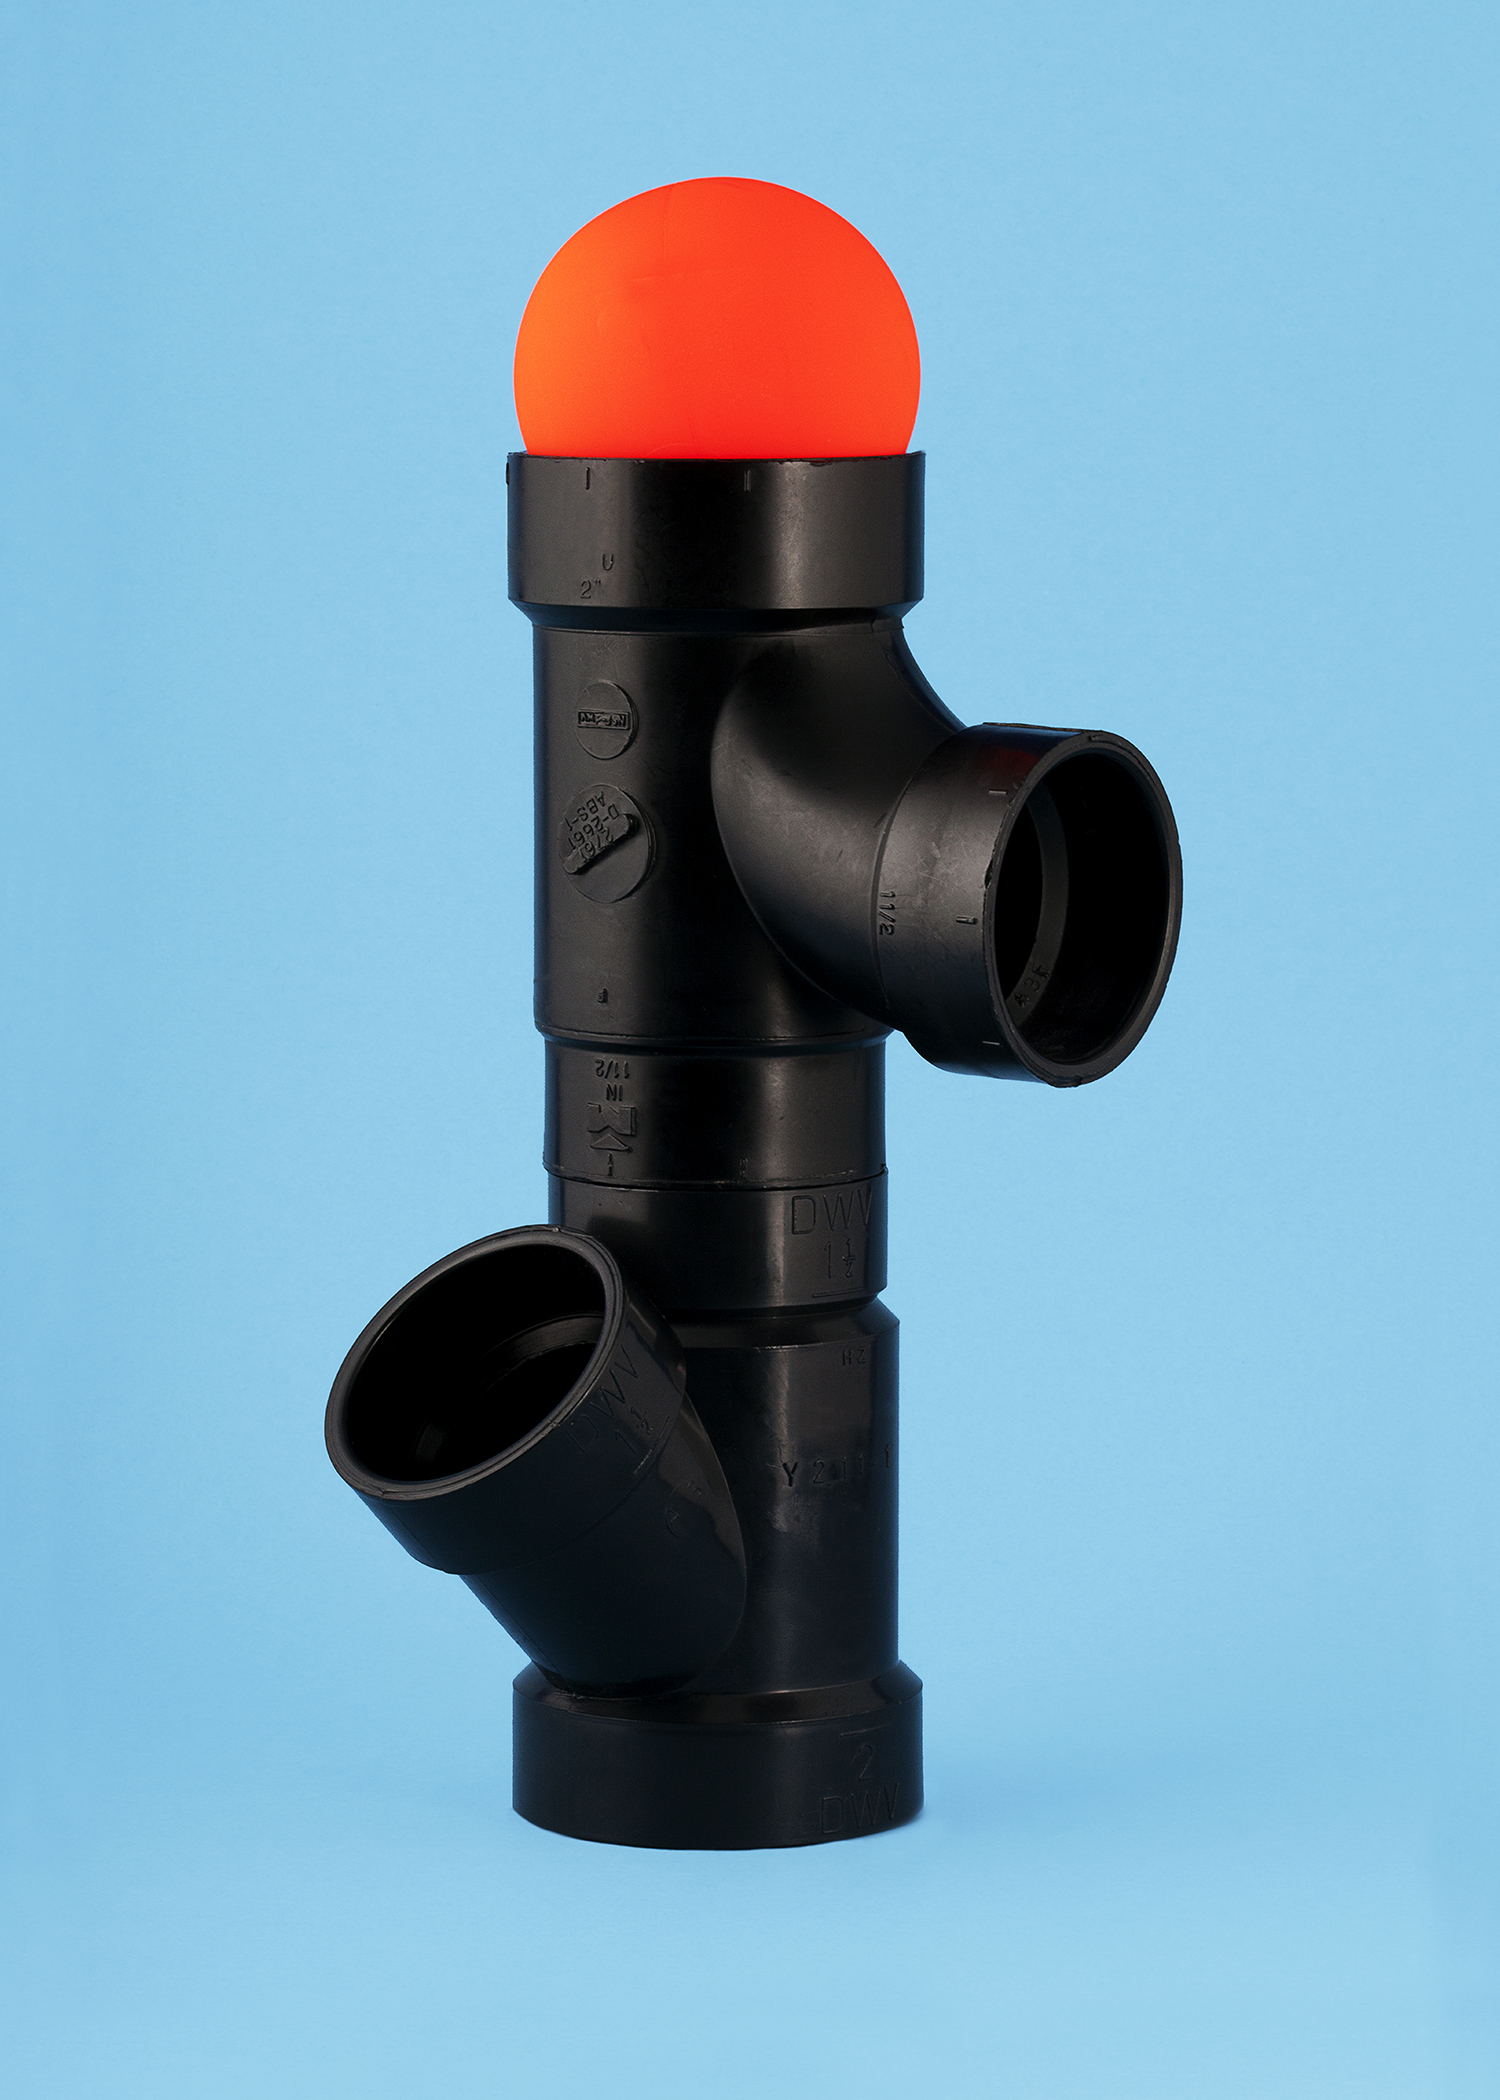 Jimmy Limit: Pipes with Orange Ball (Assemblage, Balance, Collapse, Cooperation, Drainage, Fragility, Isolation, Level, Loneliness, Masculinity, Nobody), 2013. 